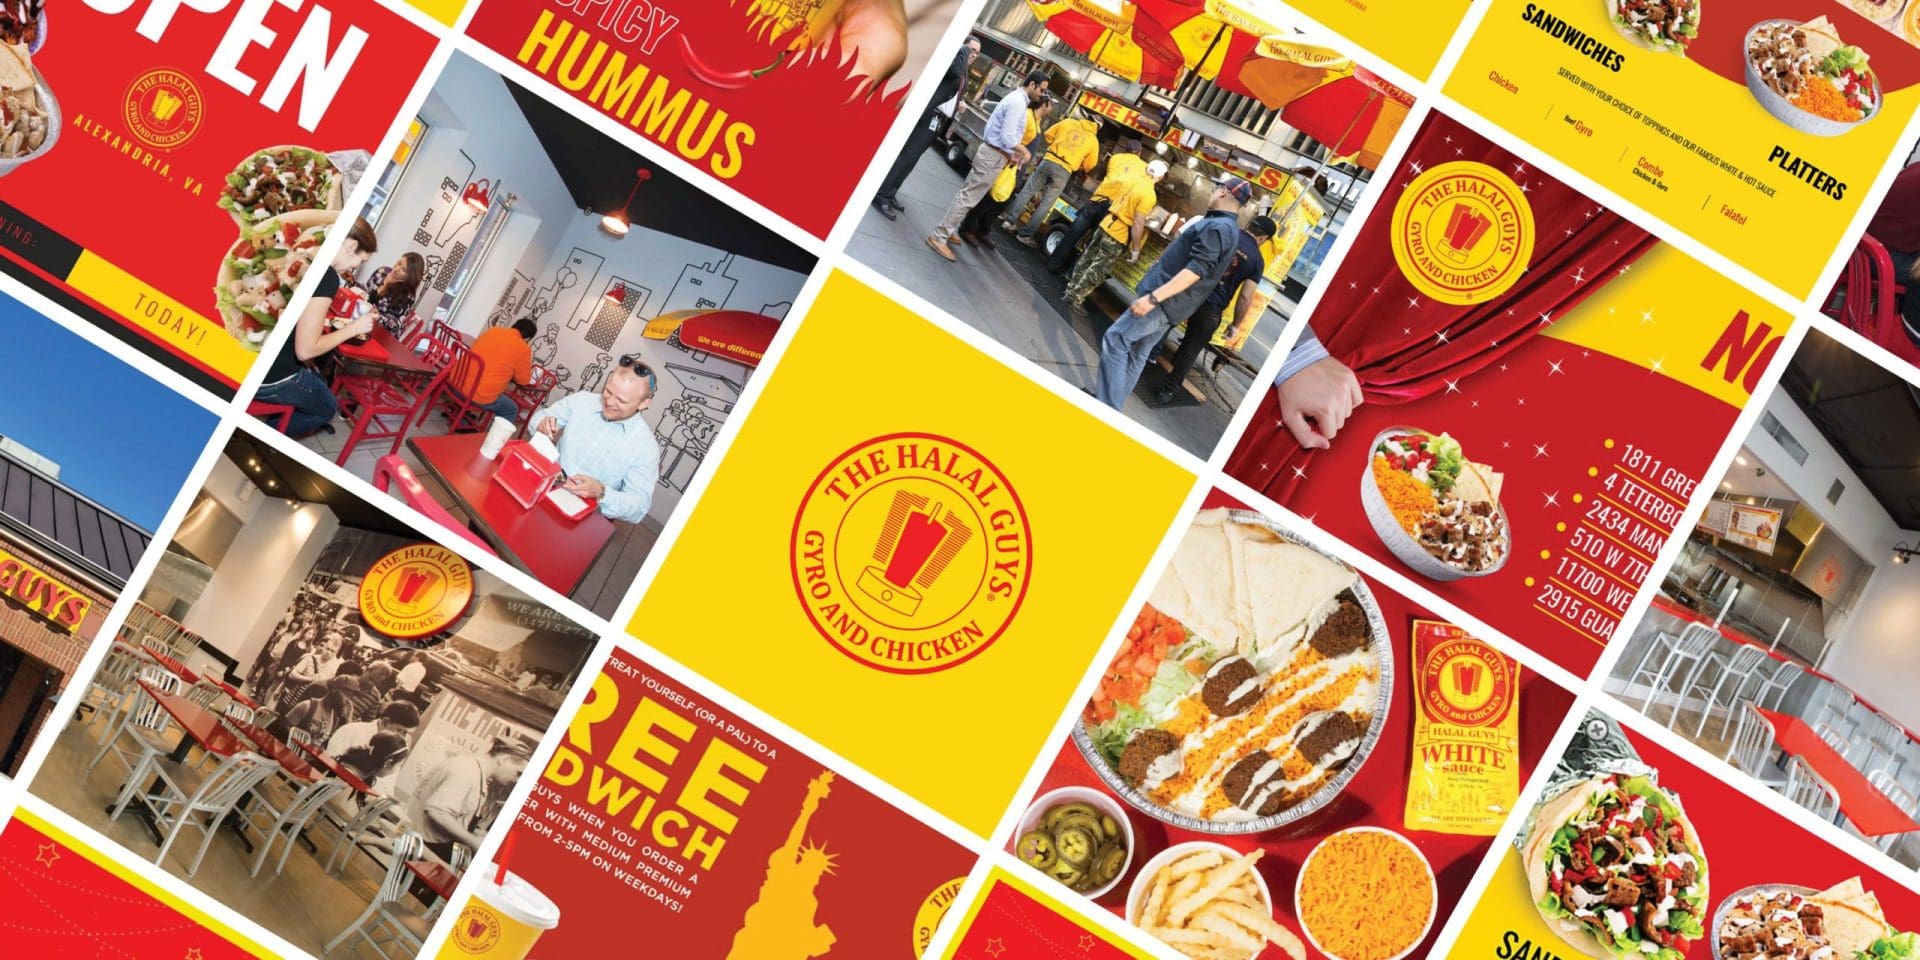 the halal guys branding review